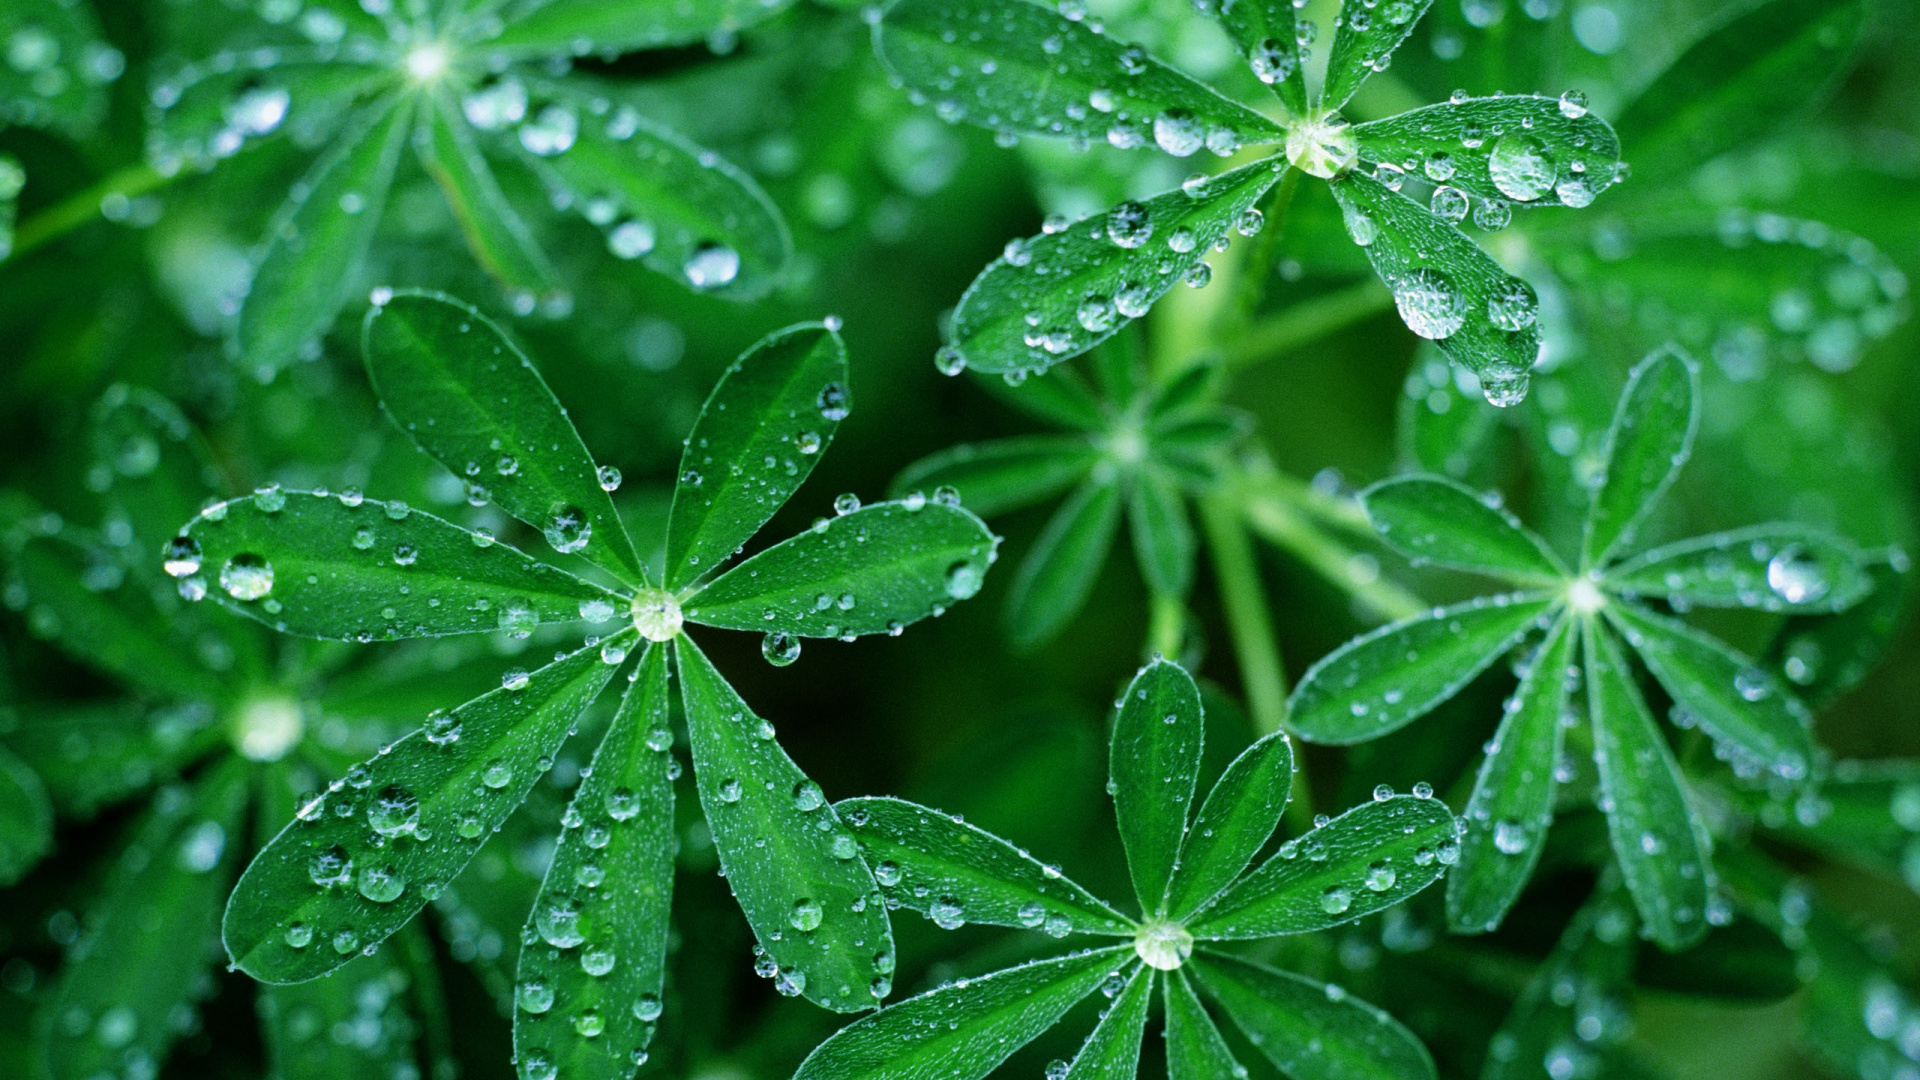 Green Leaves With Water Droplets. Wallpaper in 1920x1080 Resolution